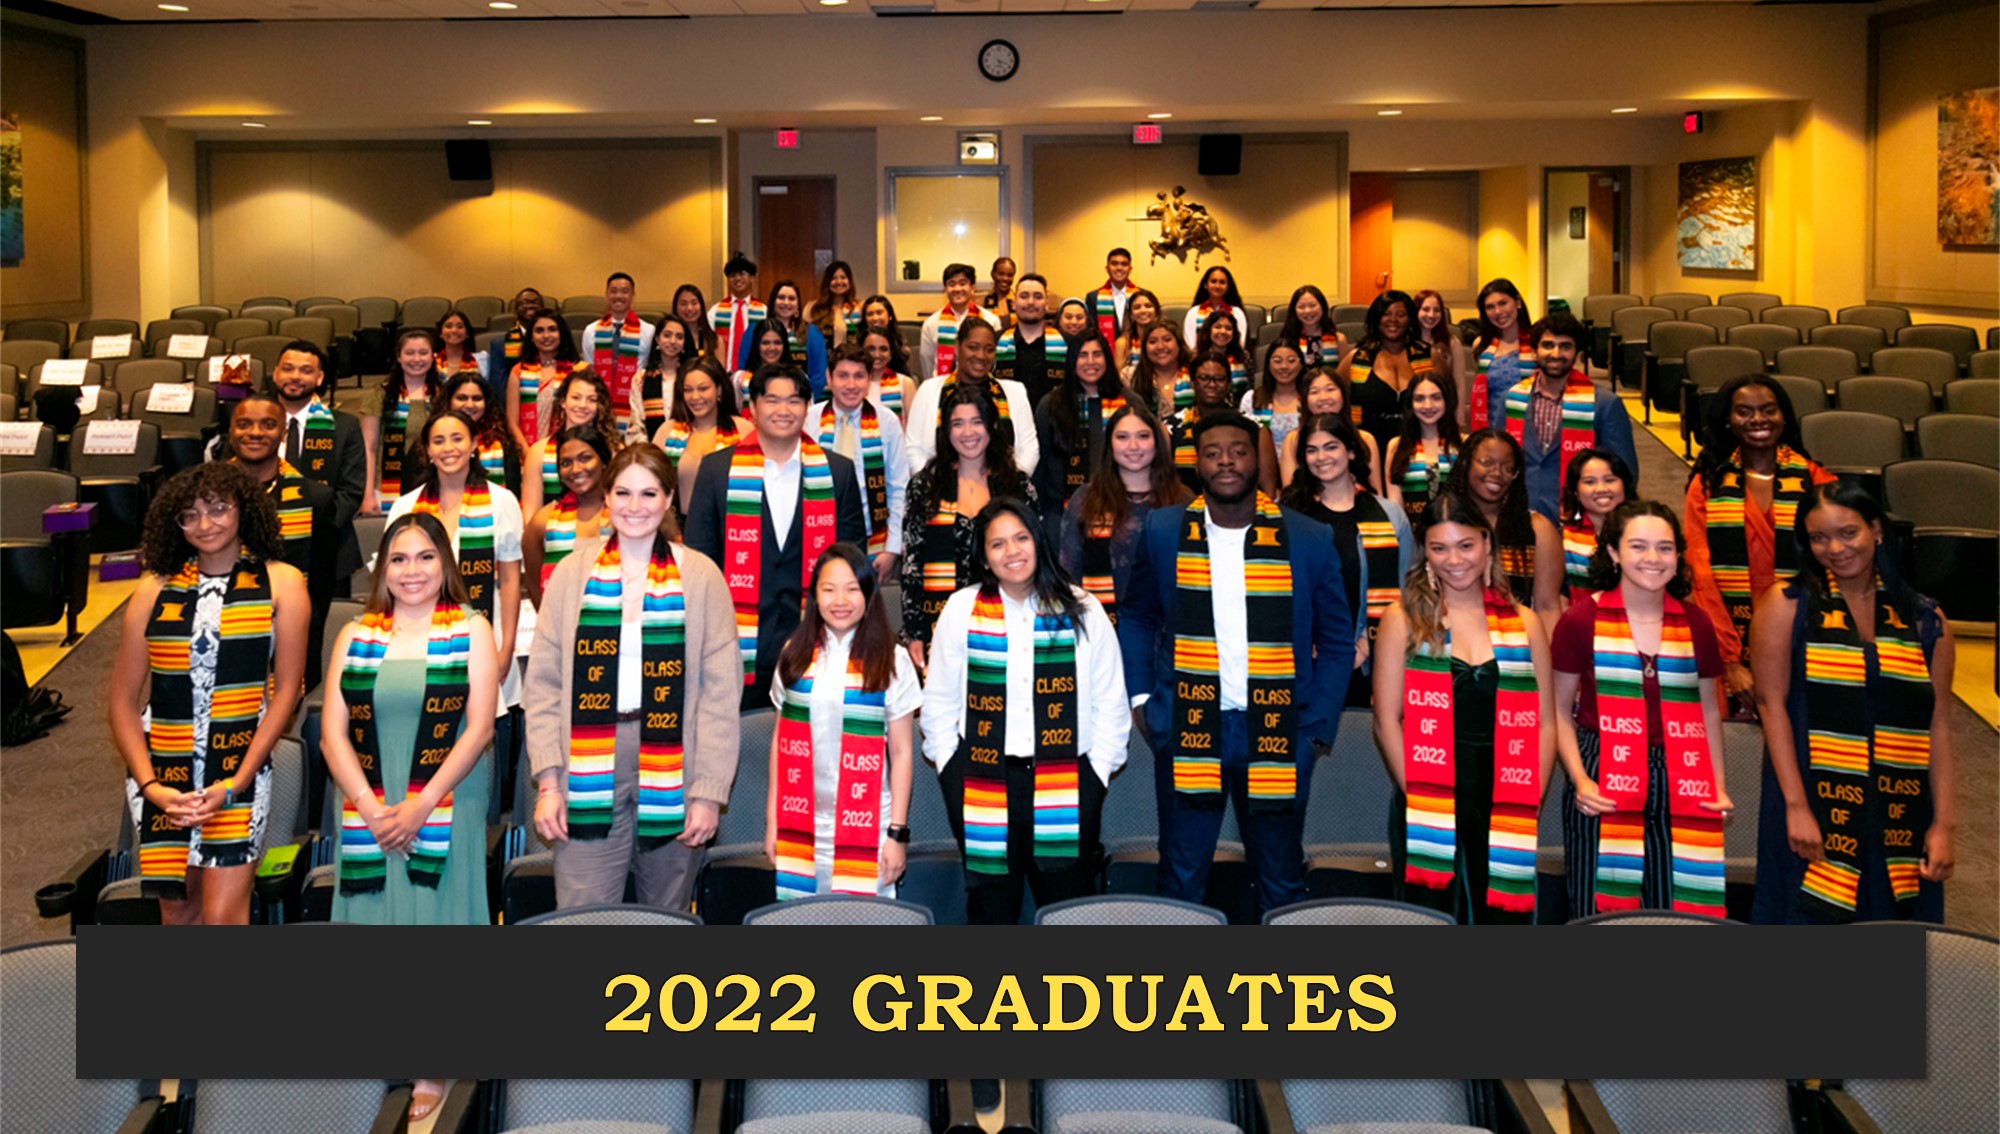 Graduates of the class of 2022 gather in the Moskovitz theater wearing their bright, multicolor stoles presented to them during the ceremony. 